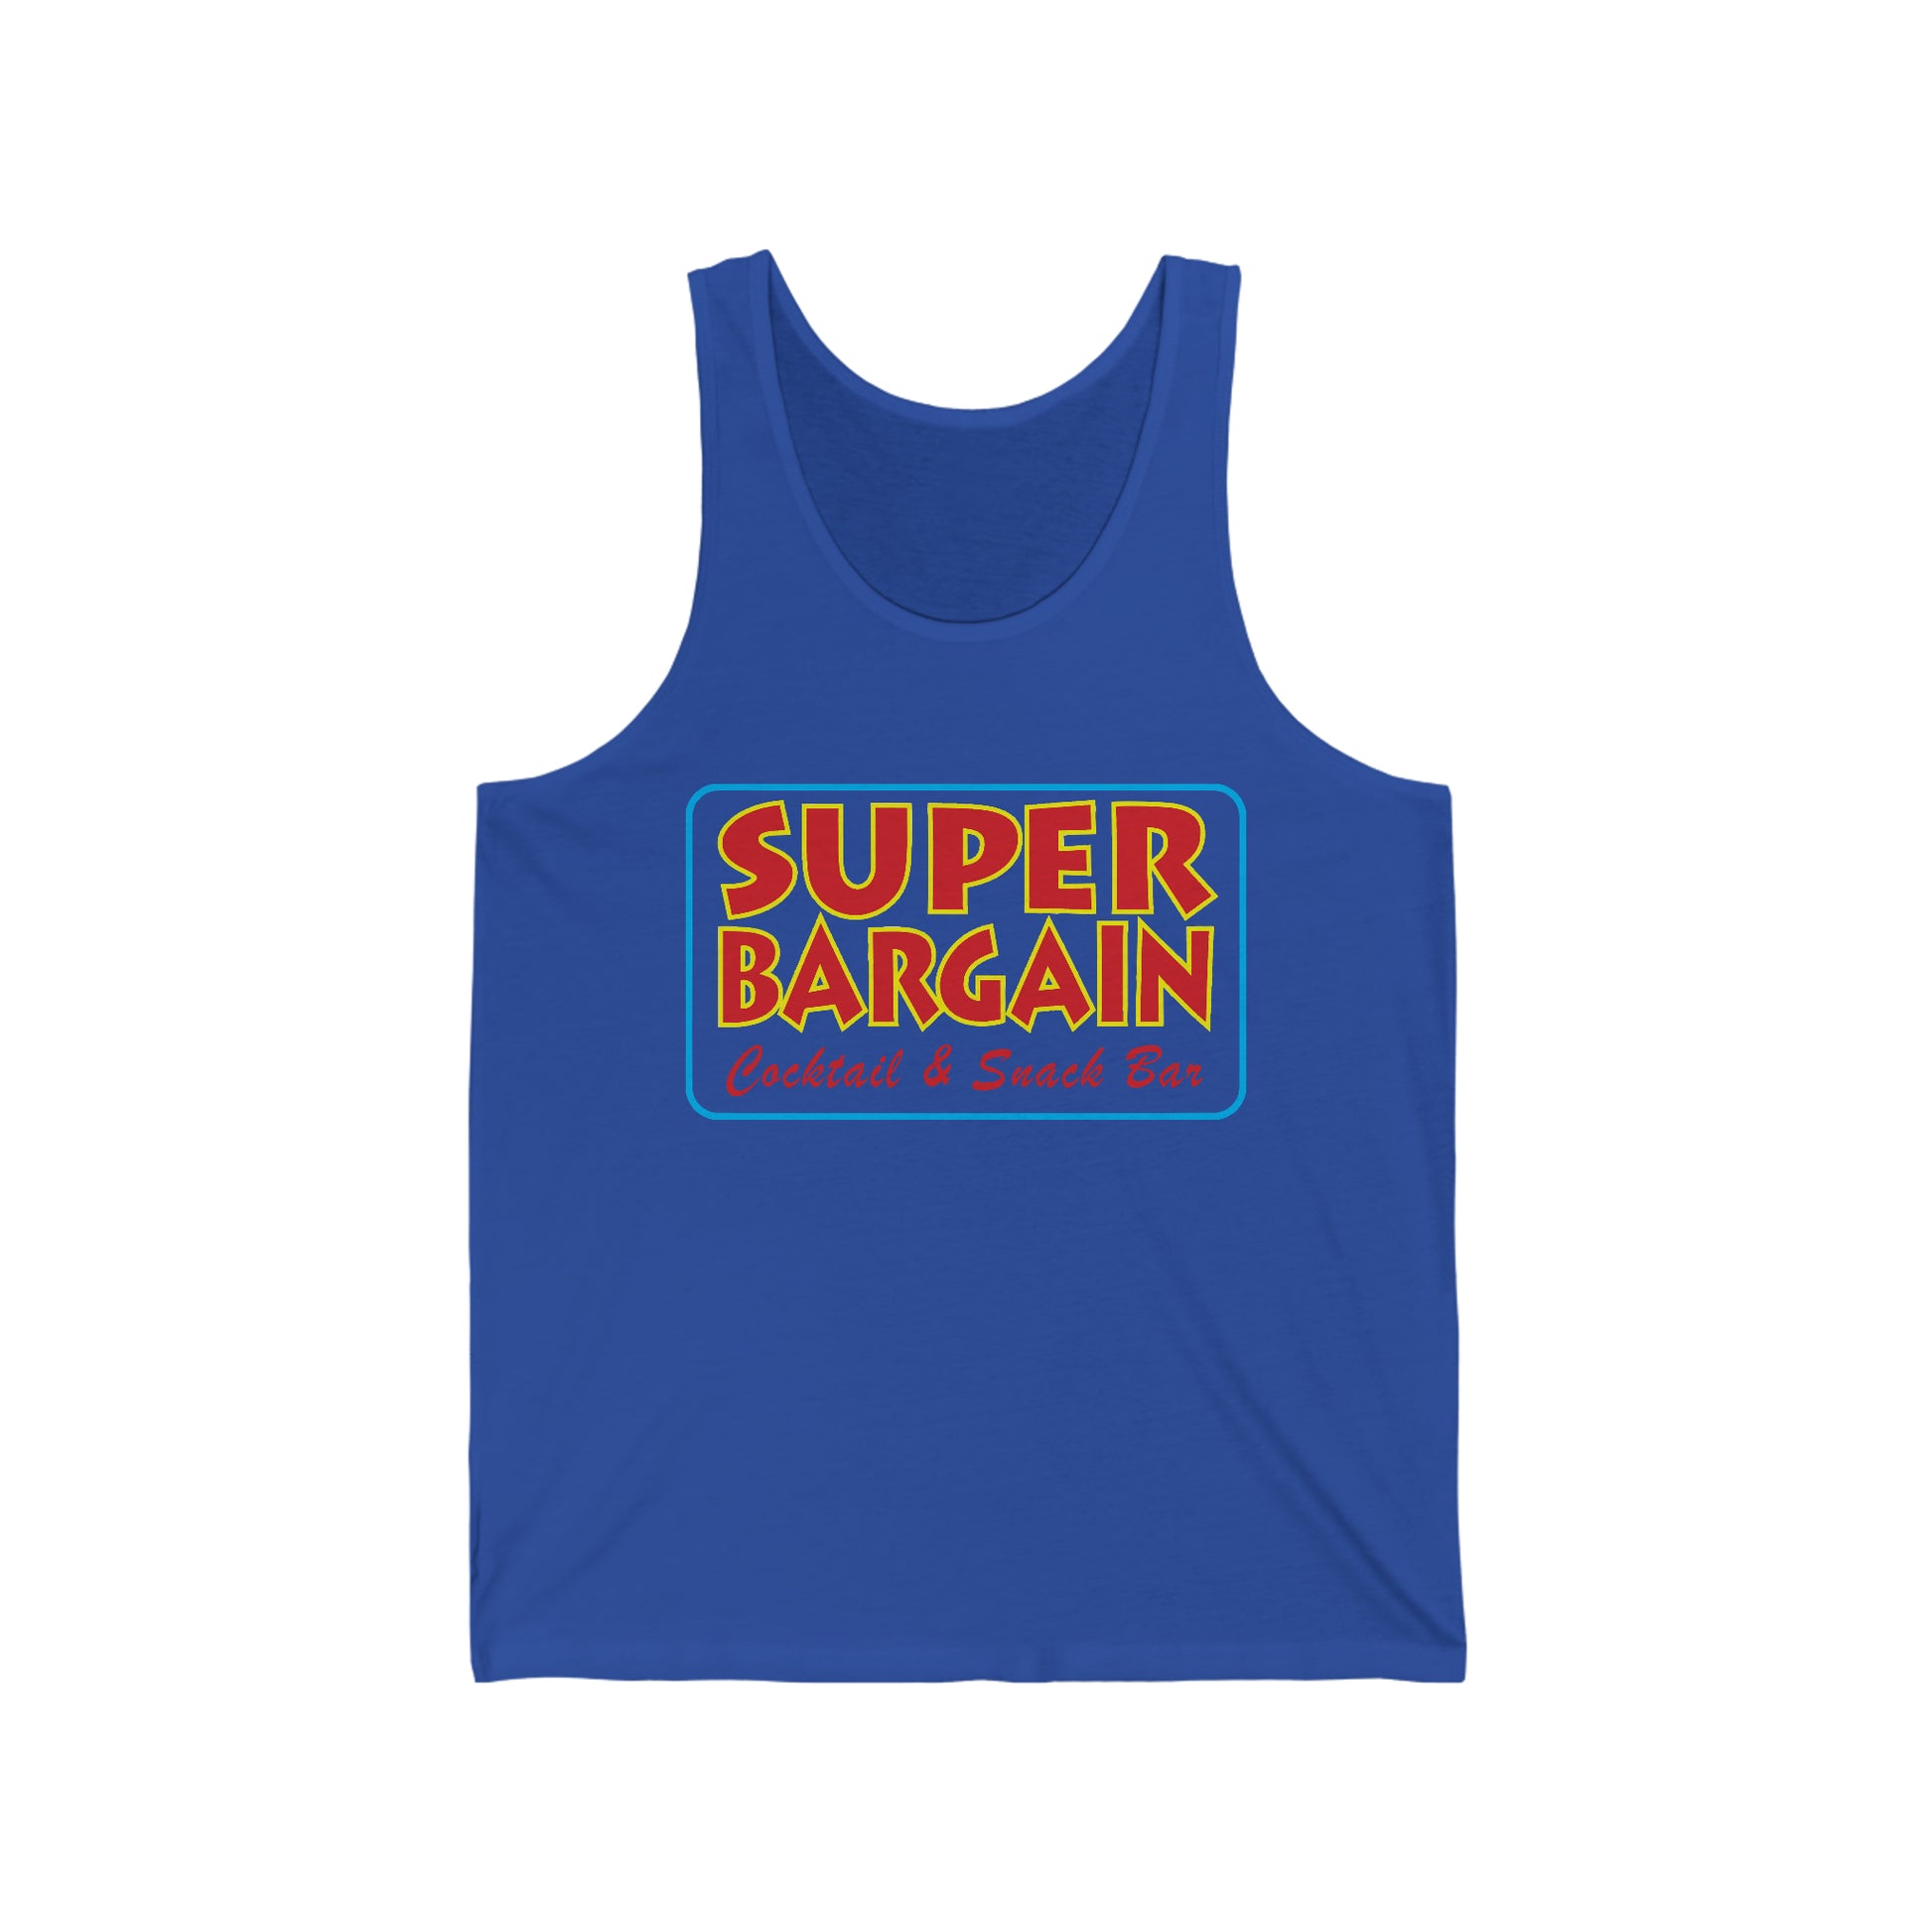 A Printify Unisex Jersey Tank featuring a colorful rectangle with the text "SUPER BARGAIN" in bold yellow letters, and "Discounted & Street Bin - Cabbagetown" in smaller red letters below.